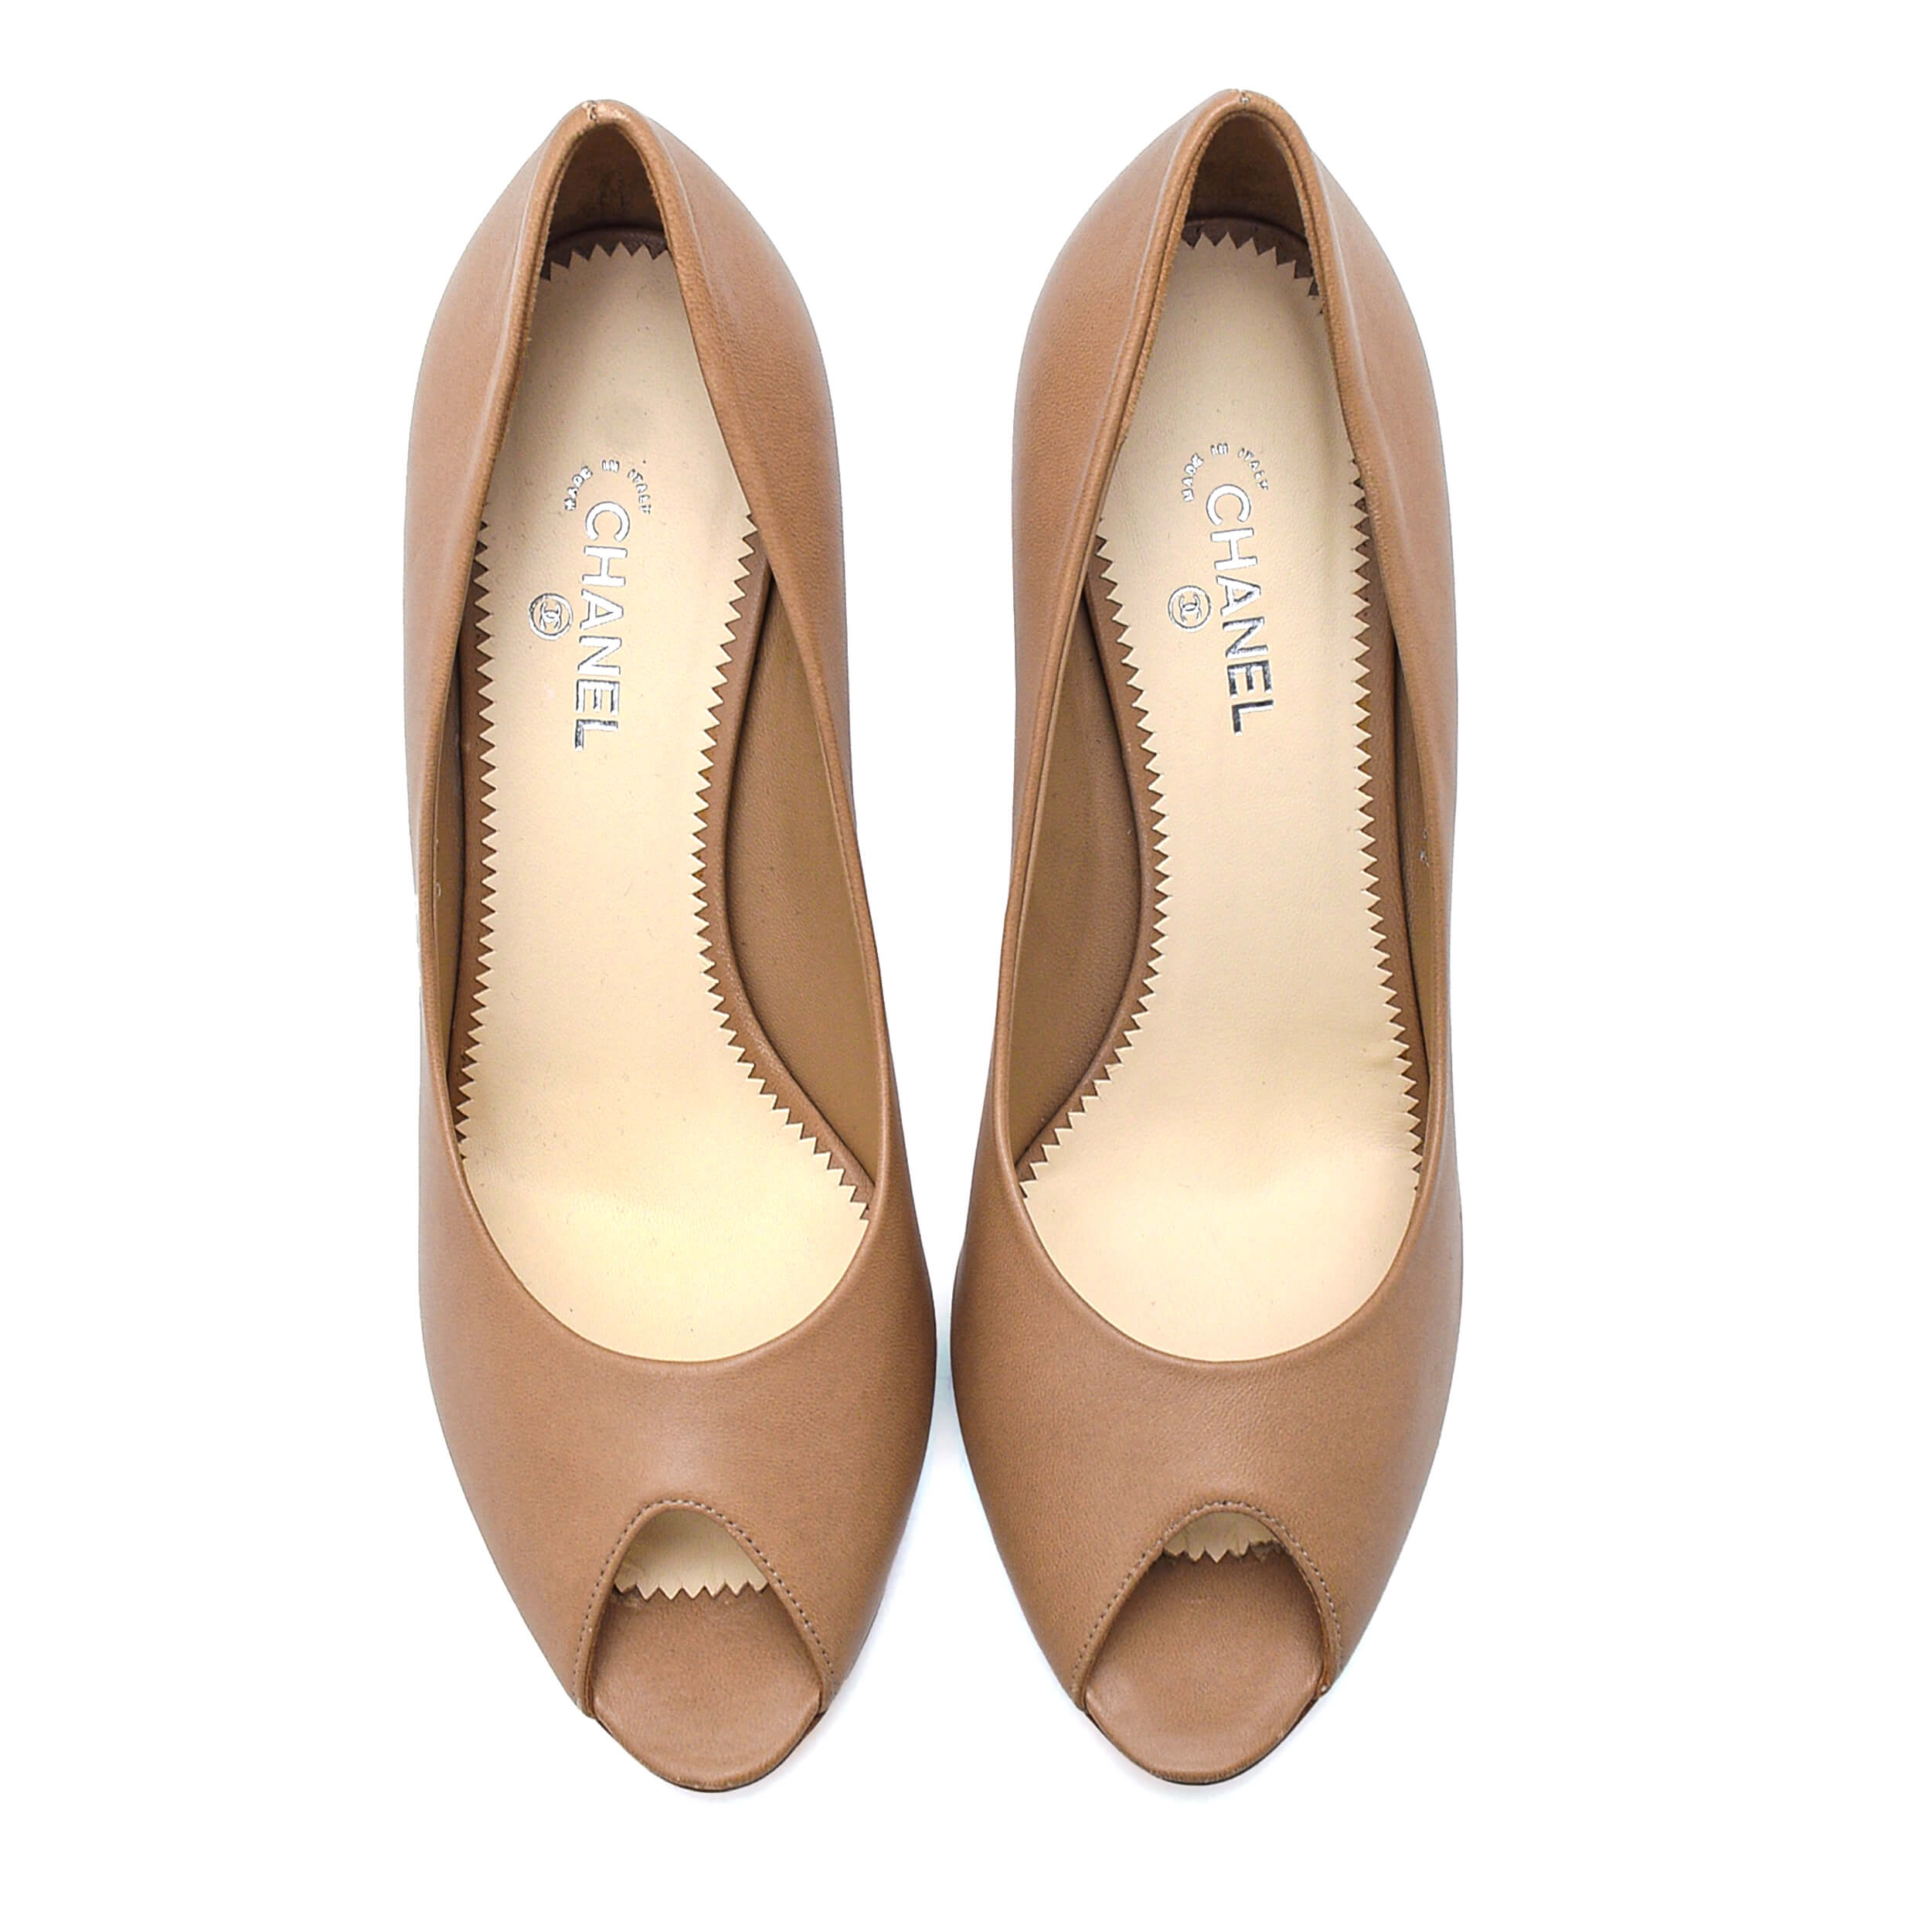 Chanel - Beige Leather Pumps / 40